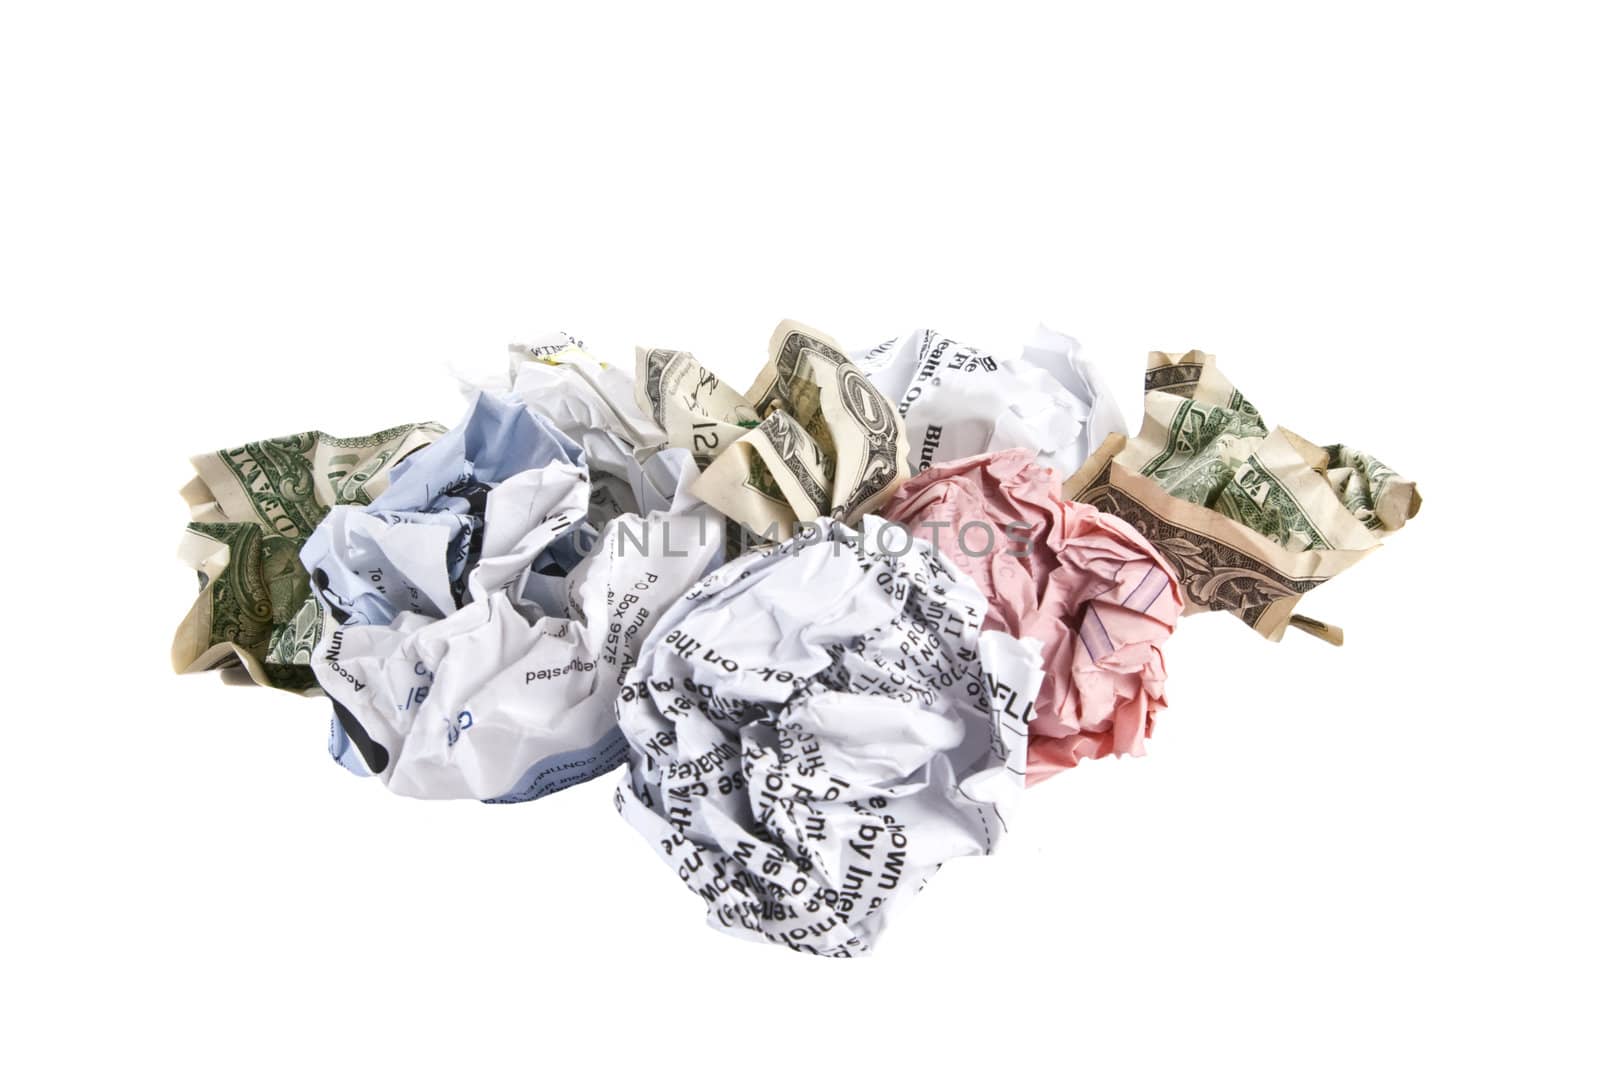 Crumpled bills and dollar bills, isolated on white background.